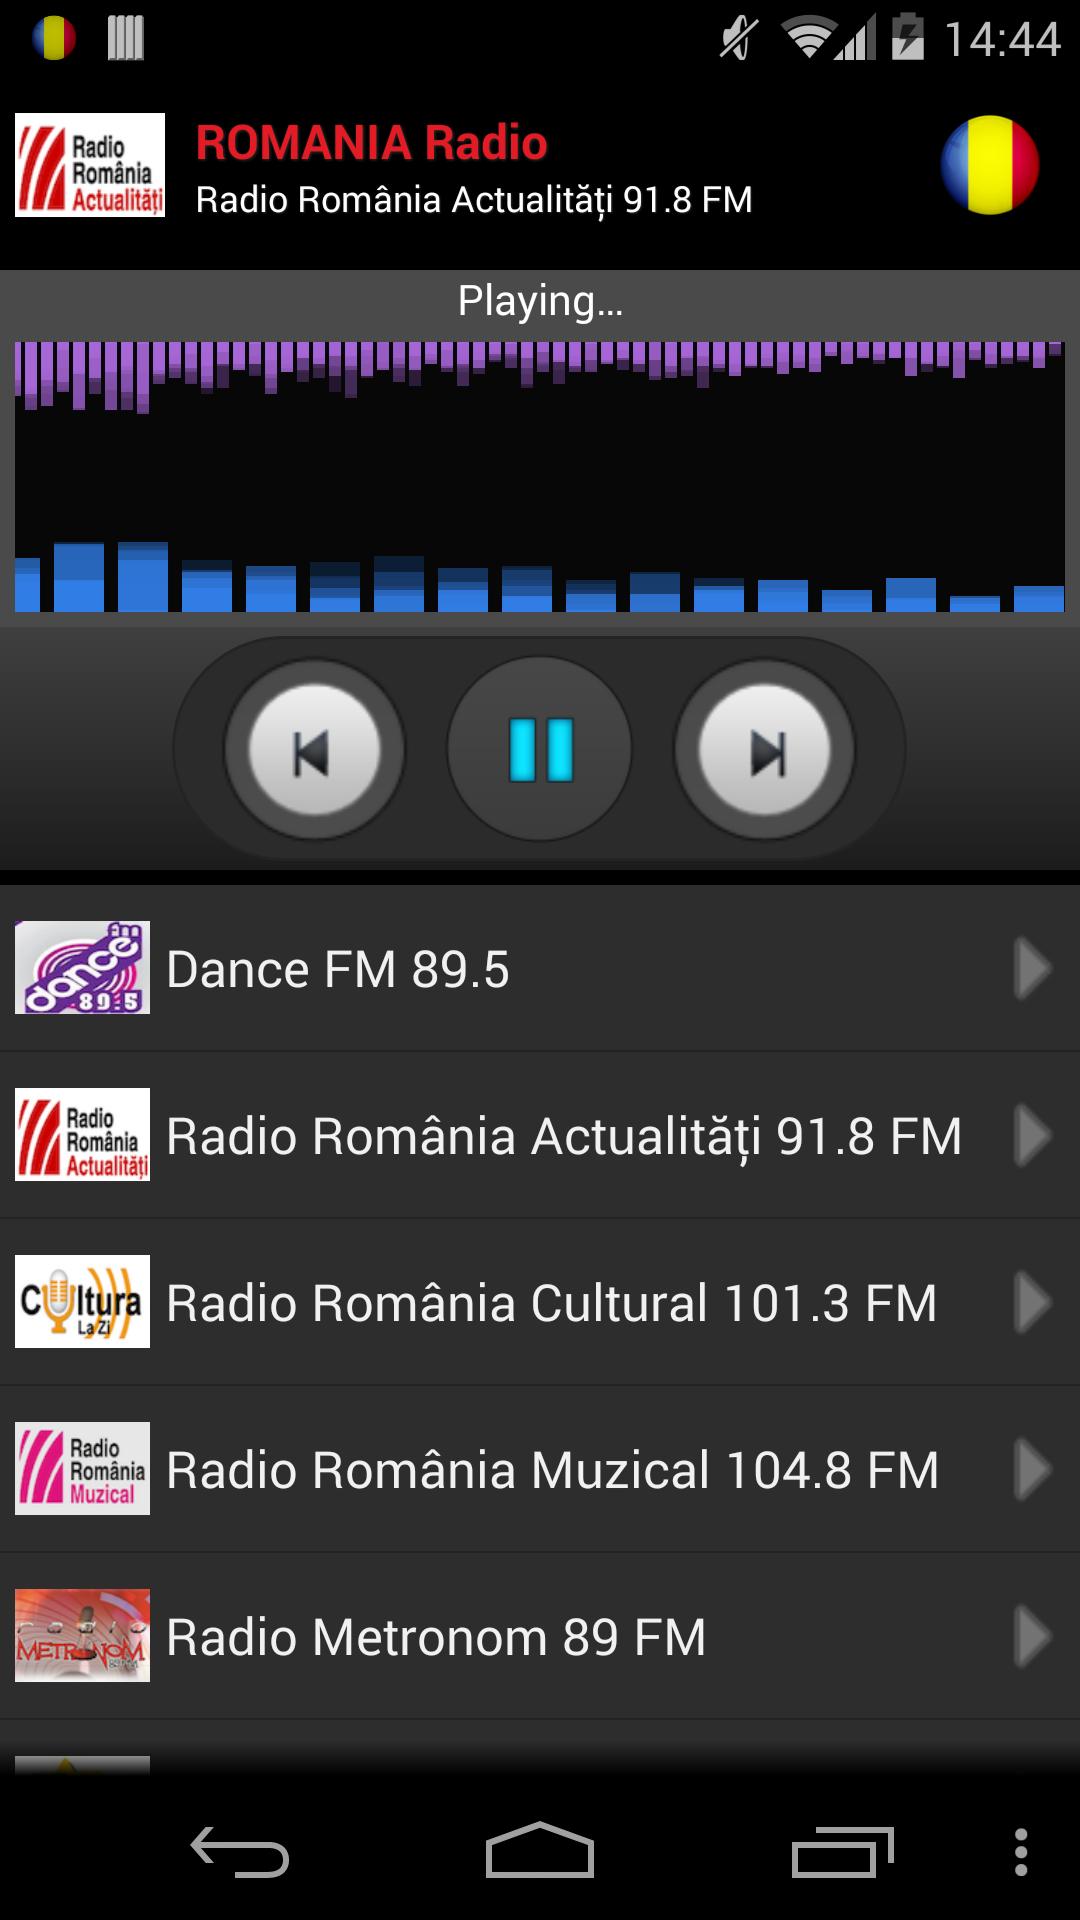 RADIO ROMANIA for Android - APK Download